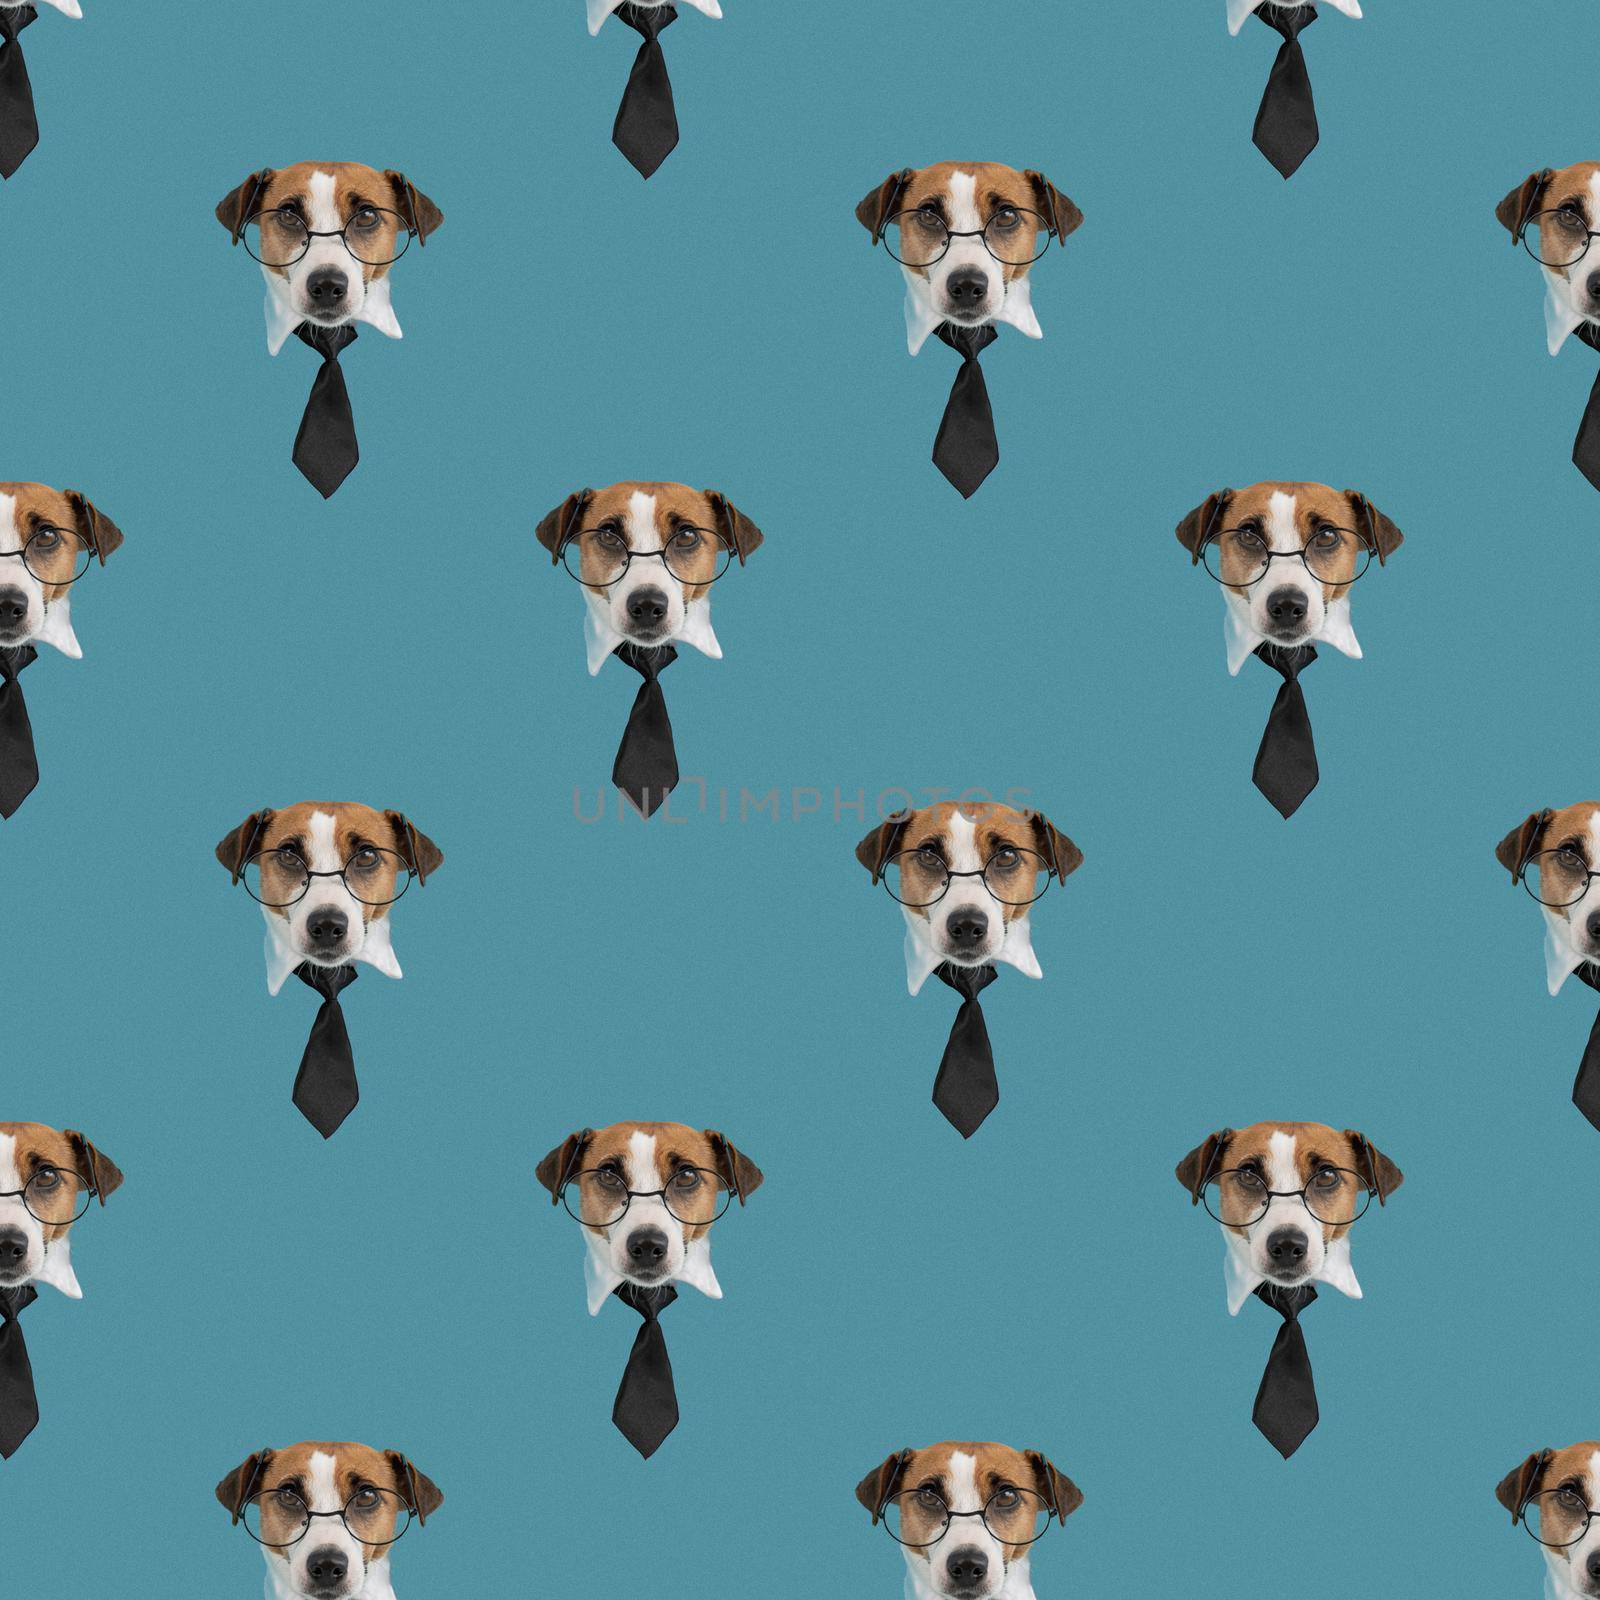 Muzzle of a Jack Russell Terrier dog with glasses and a tie on a blue background. Isolate. Seamless pattern. by mrwed54